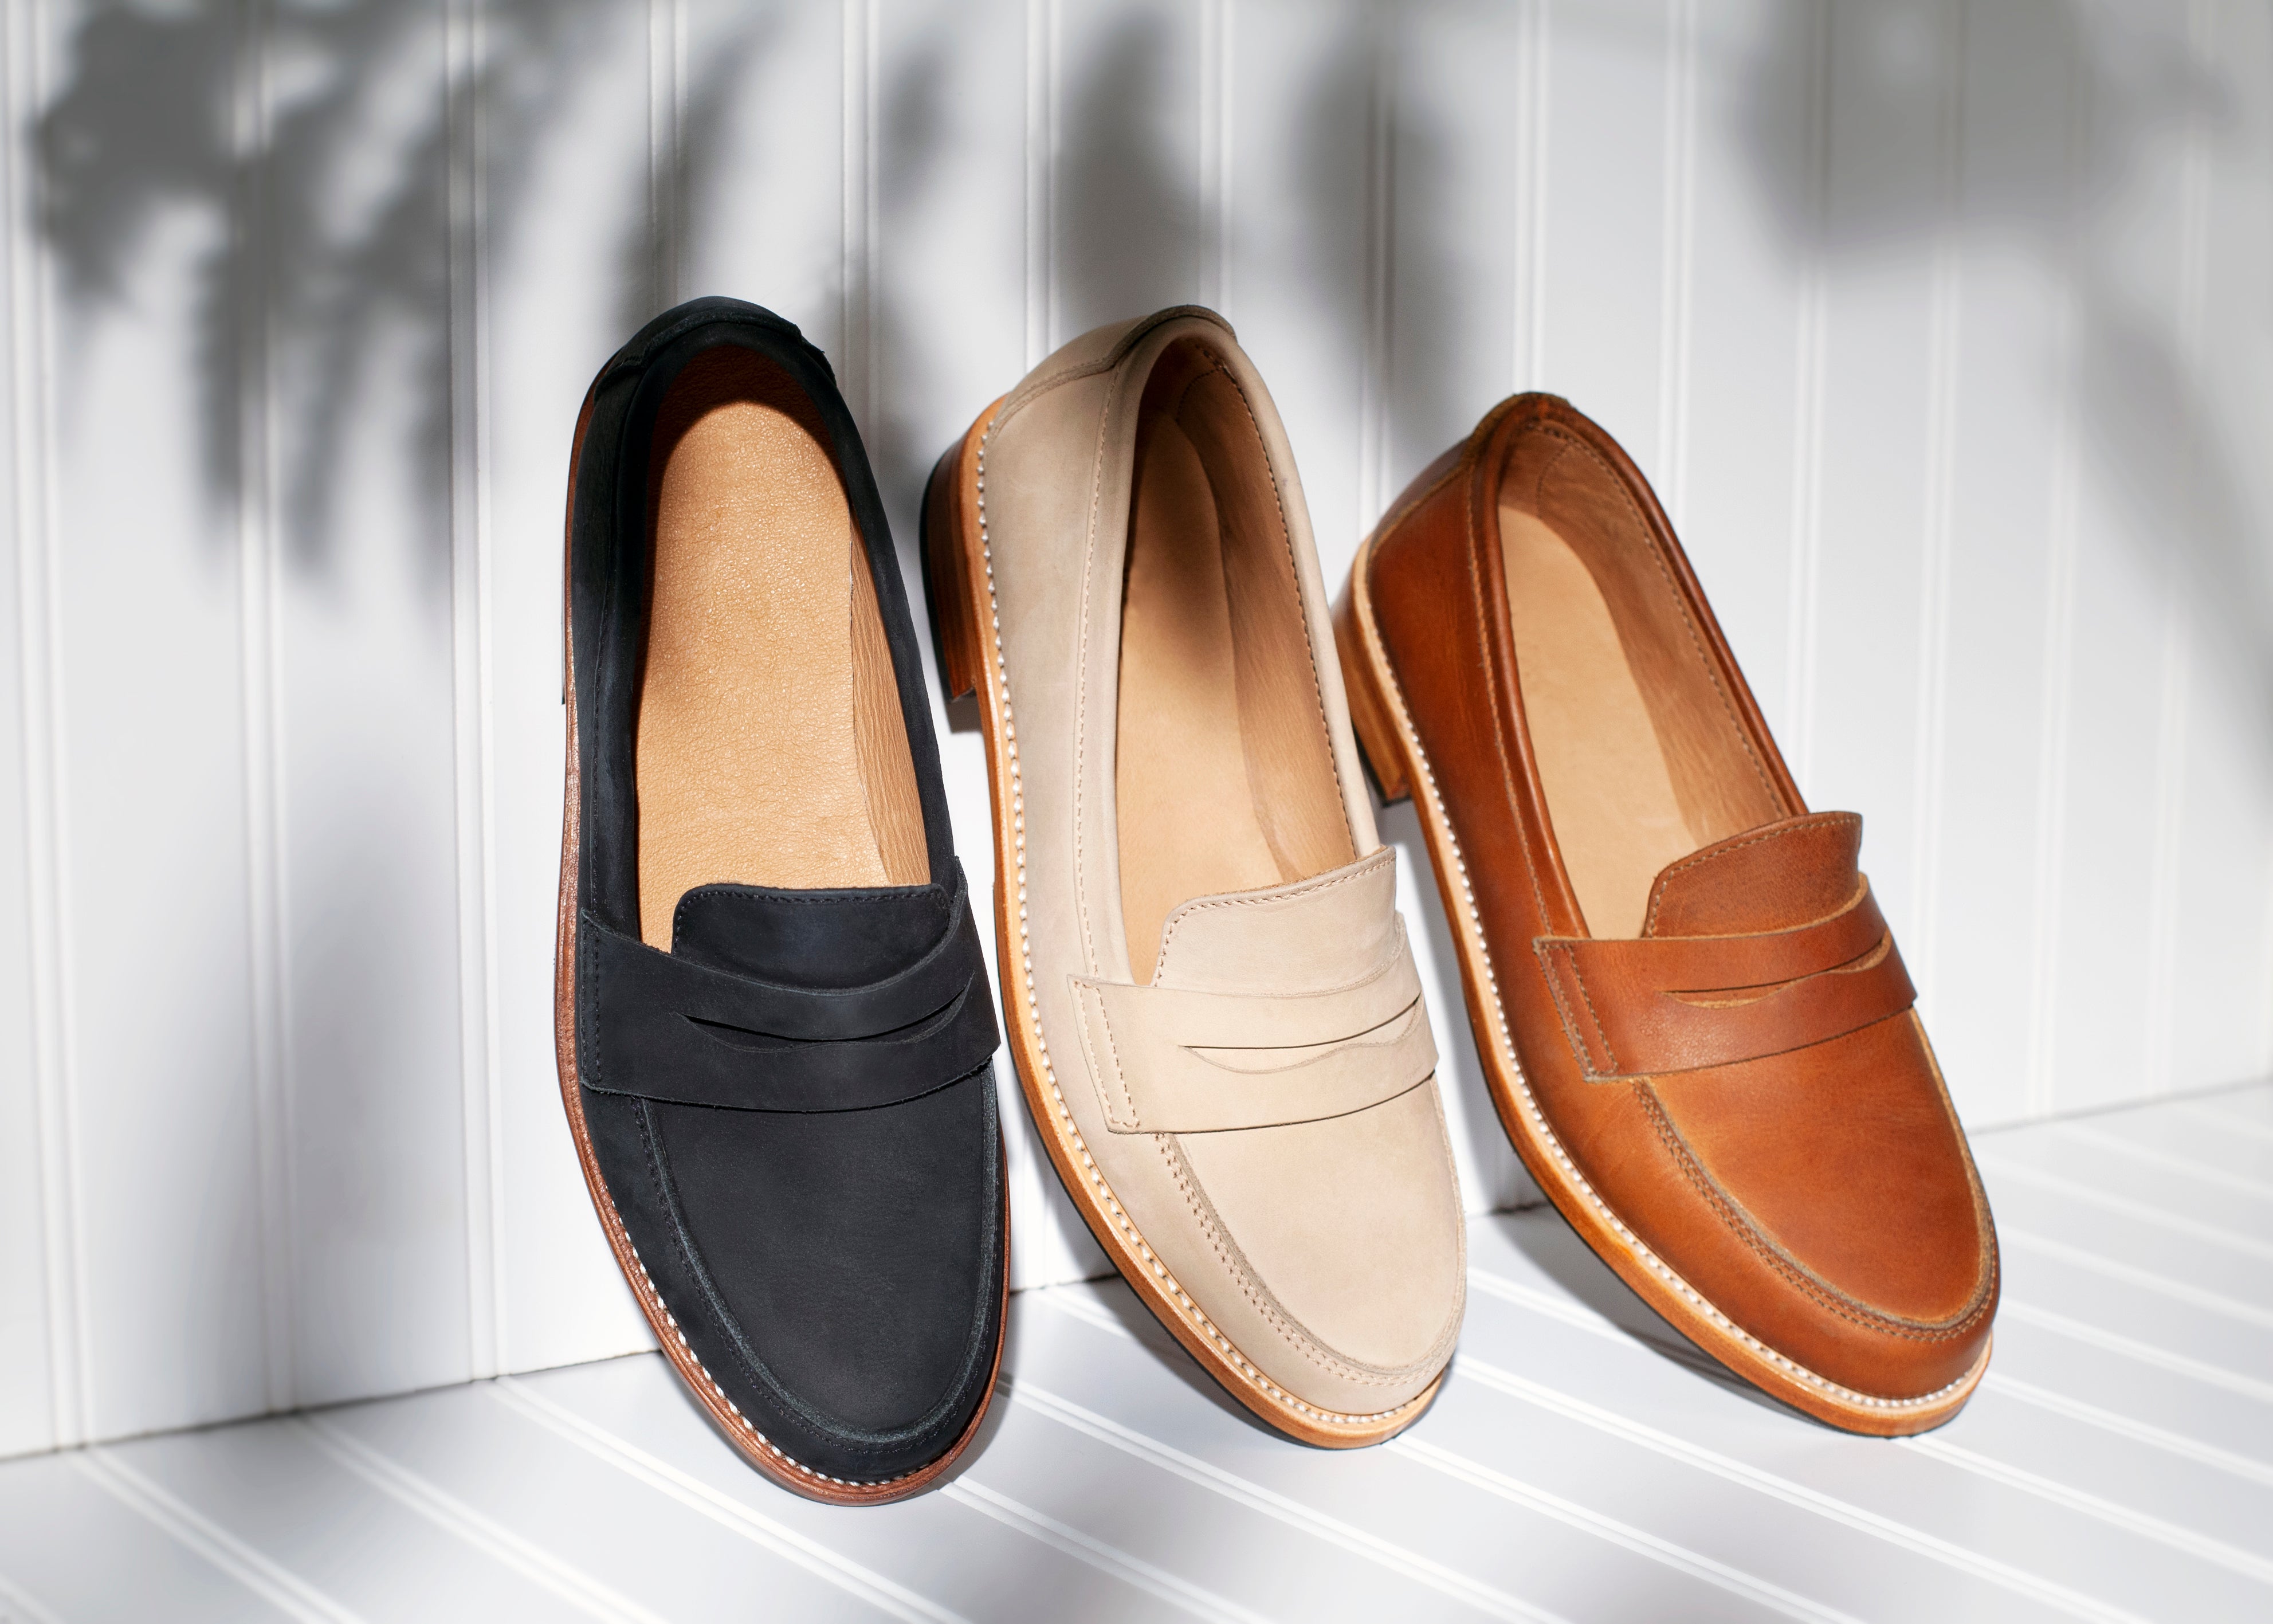 Browse Free HD Images of Loafers Leaning Along White Wall